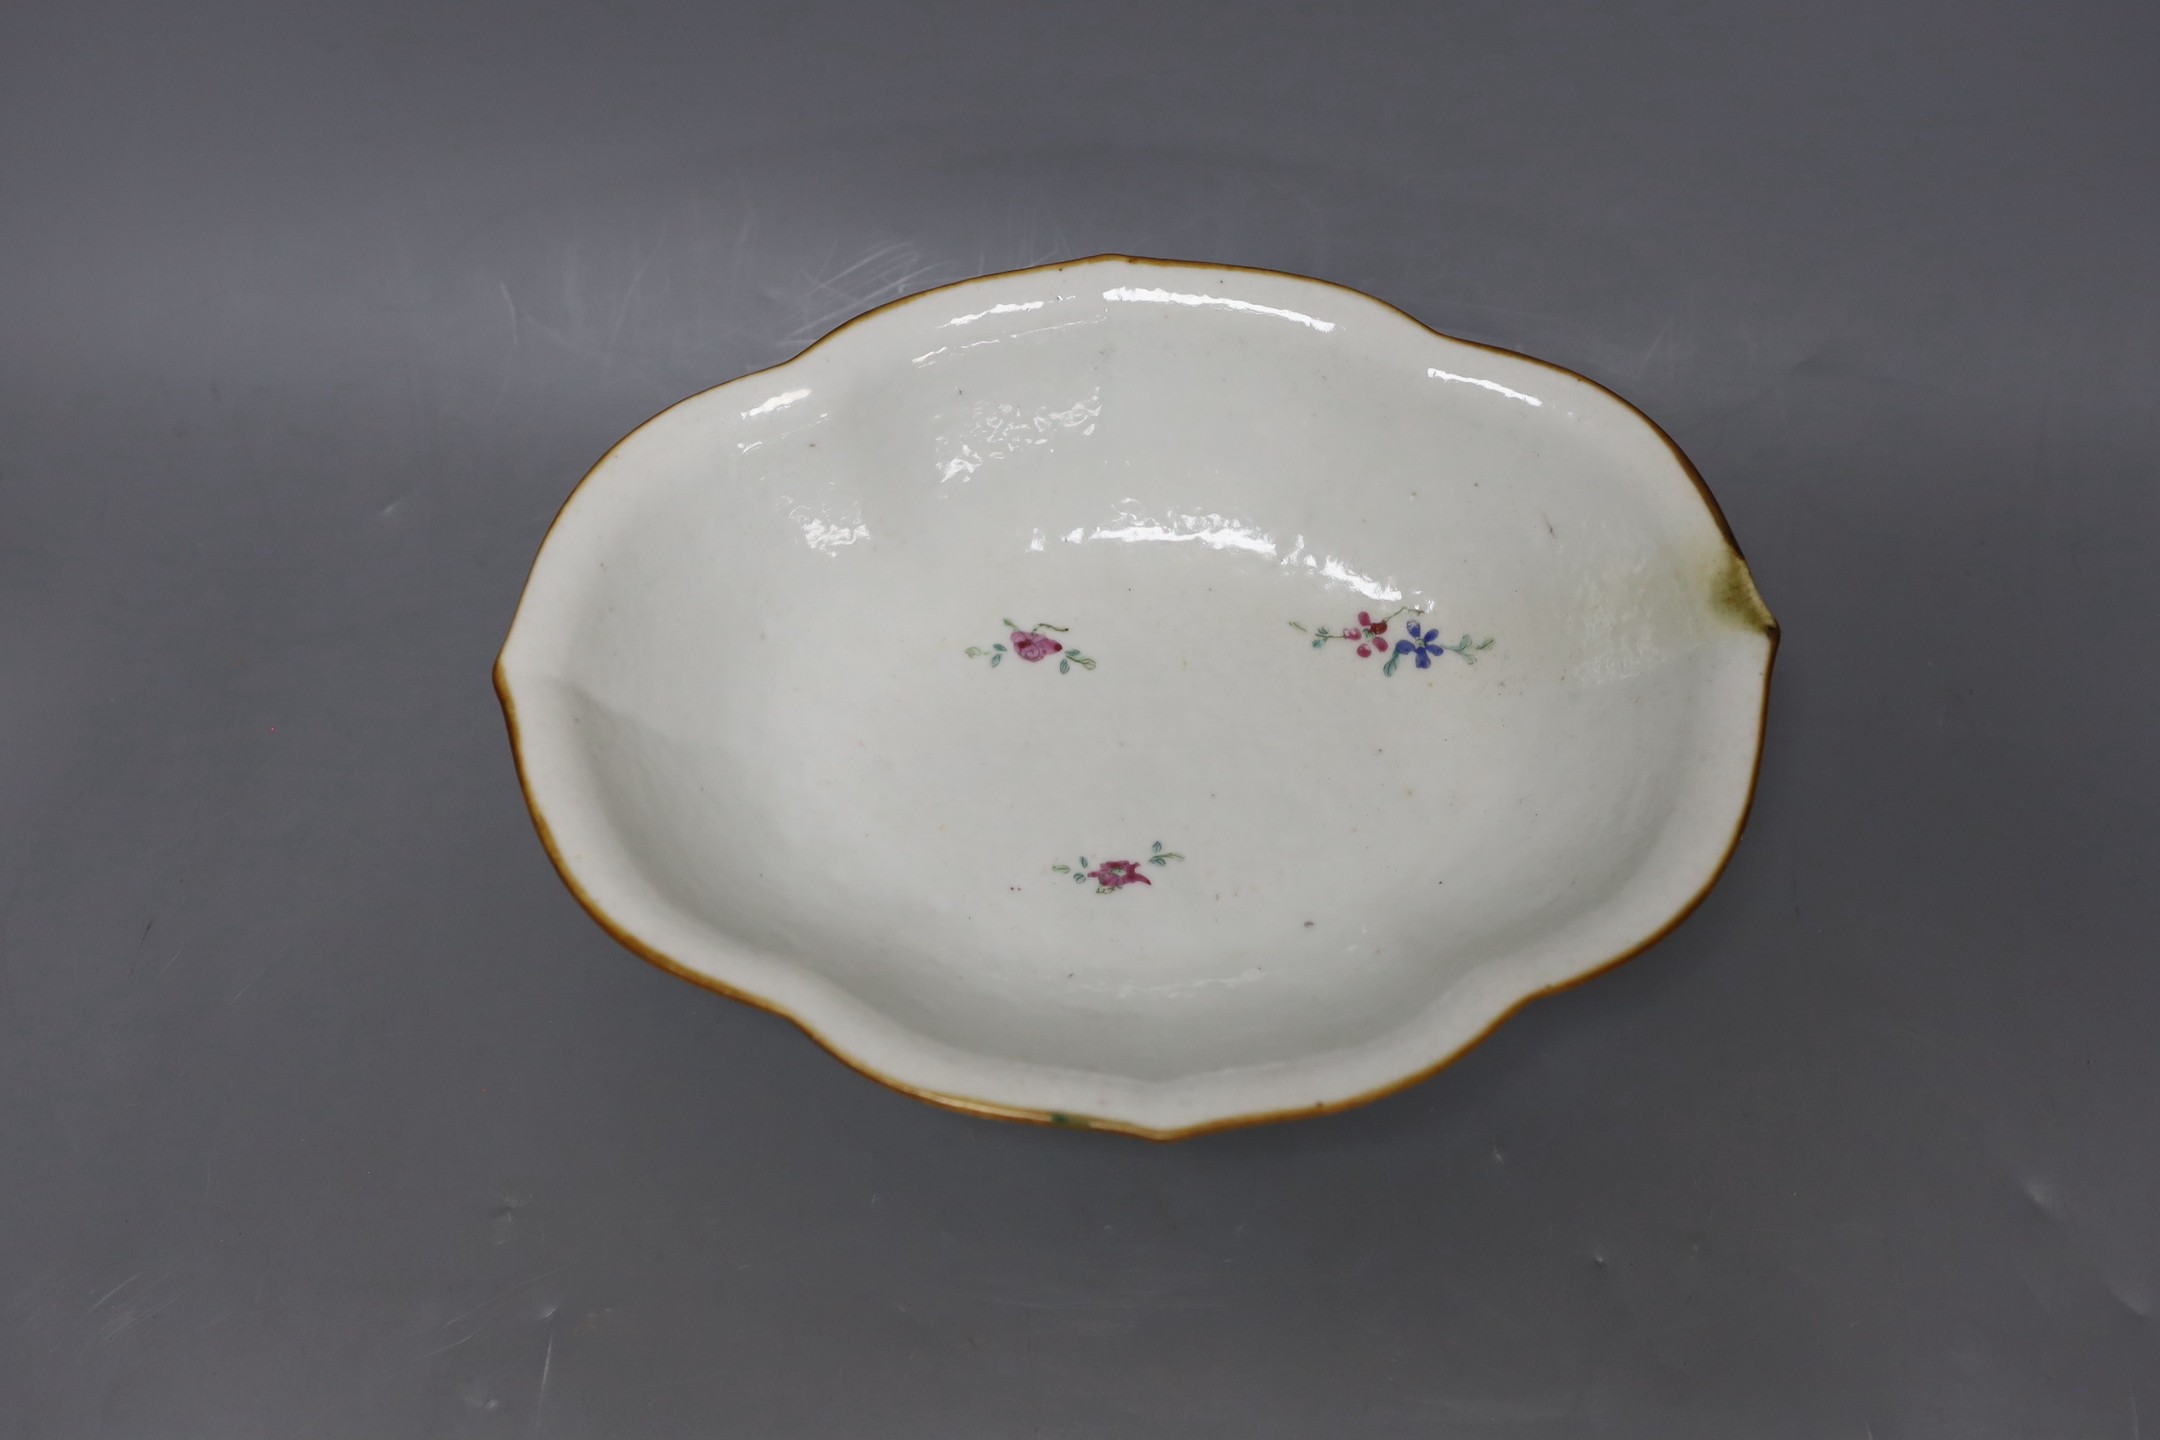 A Chinese inscribed famille rose footed dish, mid 19th century, 28cm long